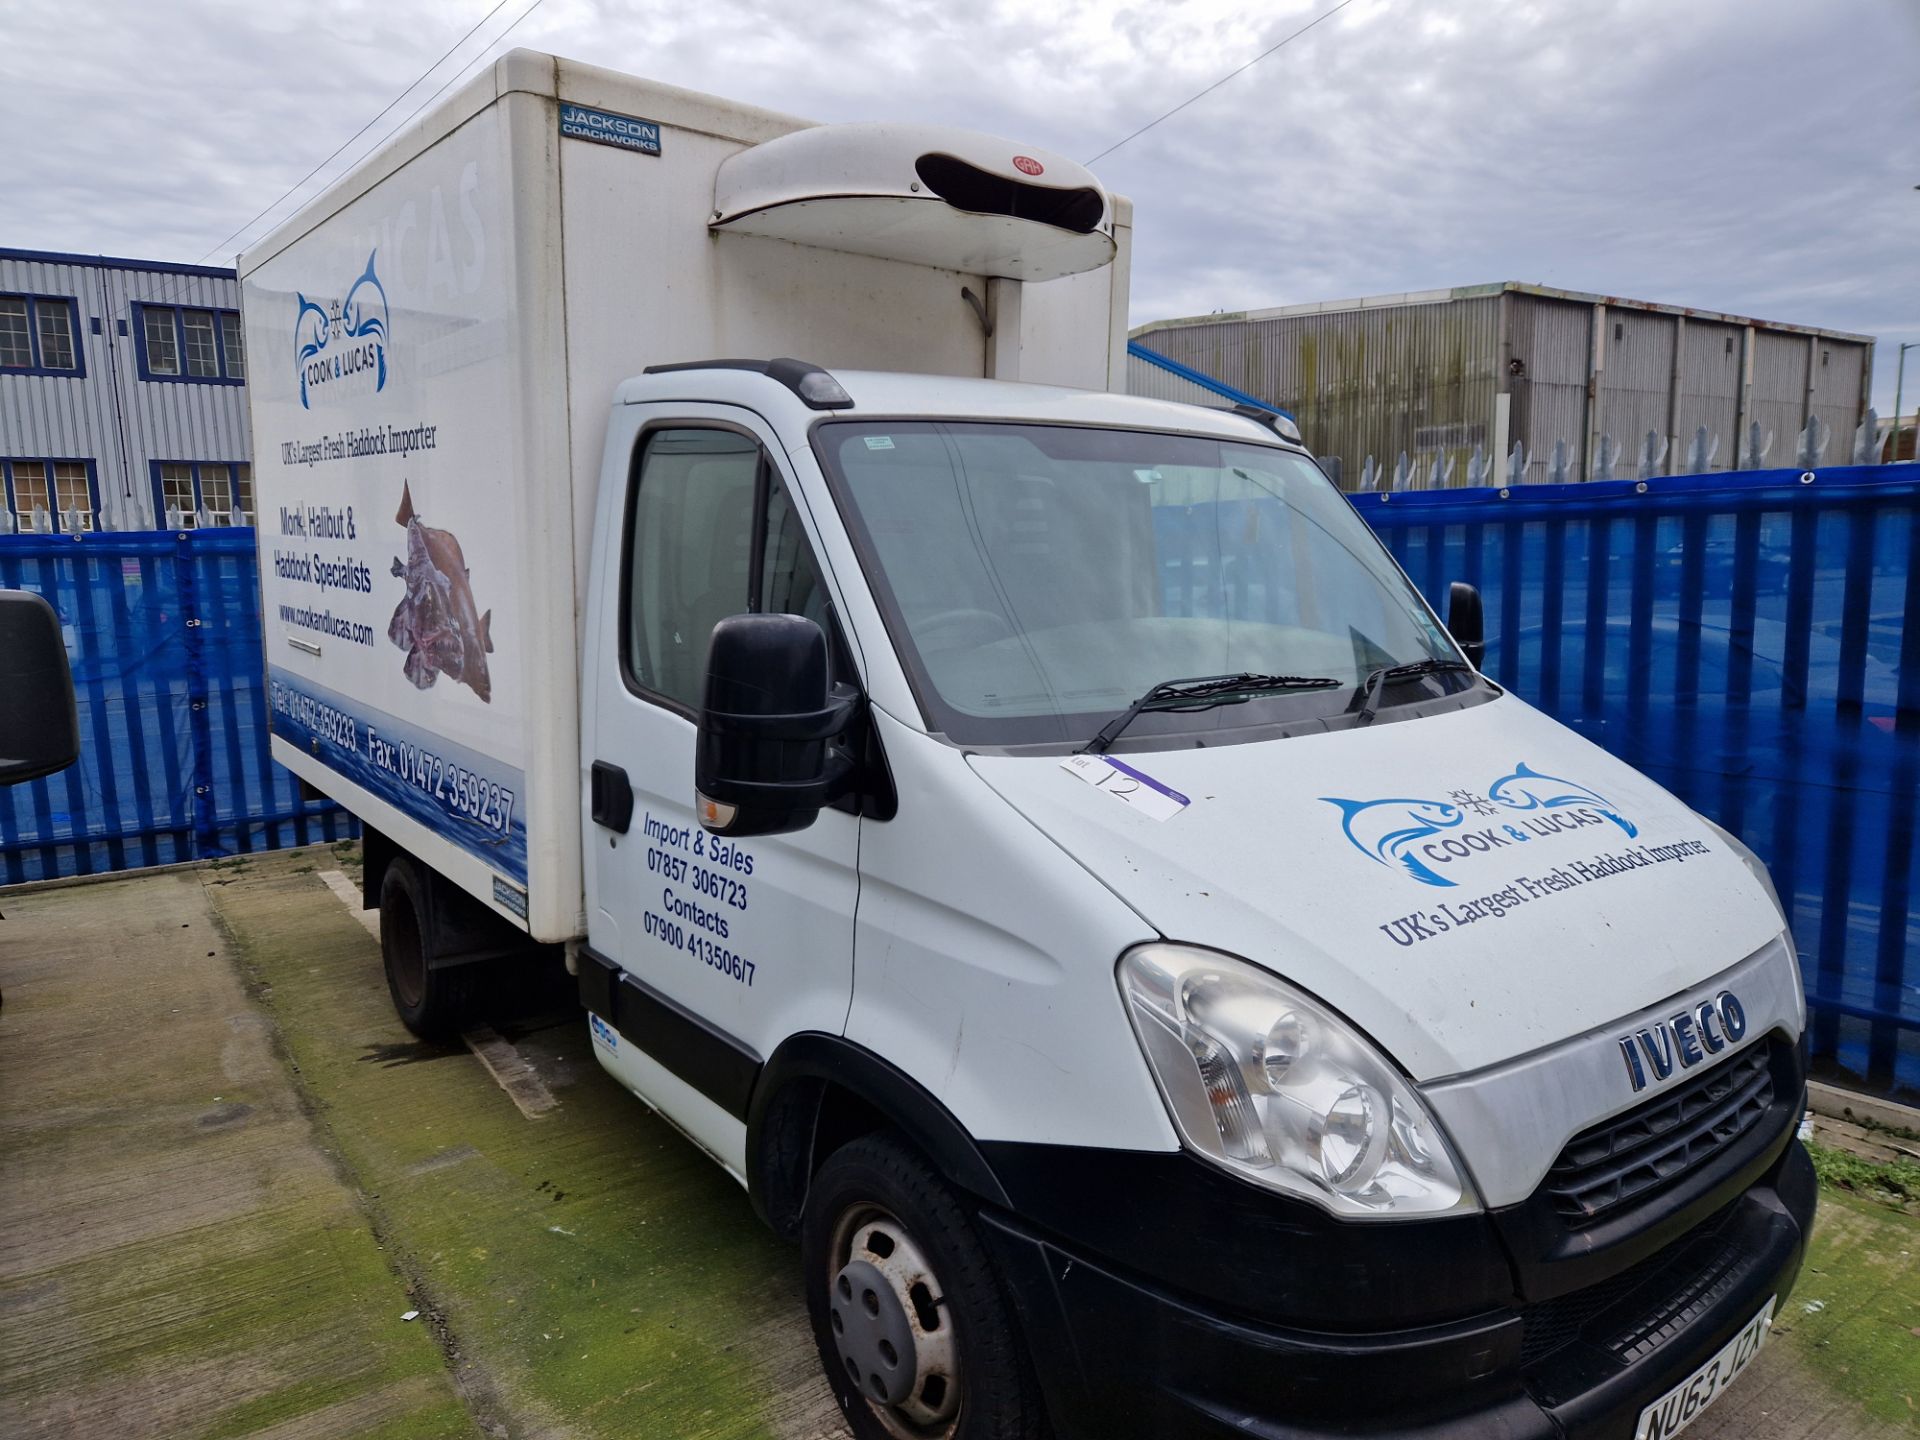 Iveco Daily 35C13 SWB Refrigerated Box Van, registration no. NU63 JZX, date first registered 01/09/